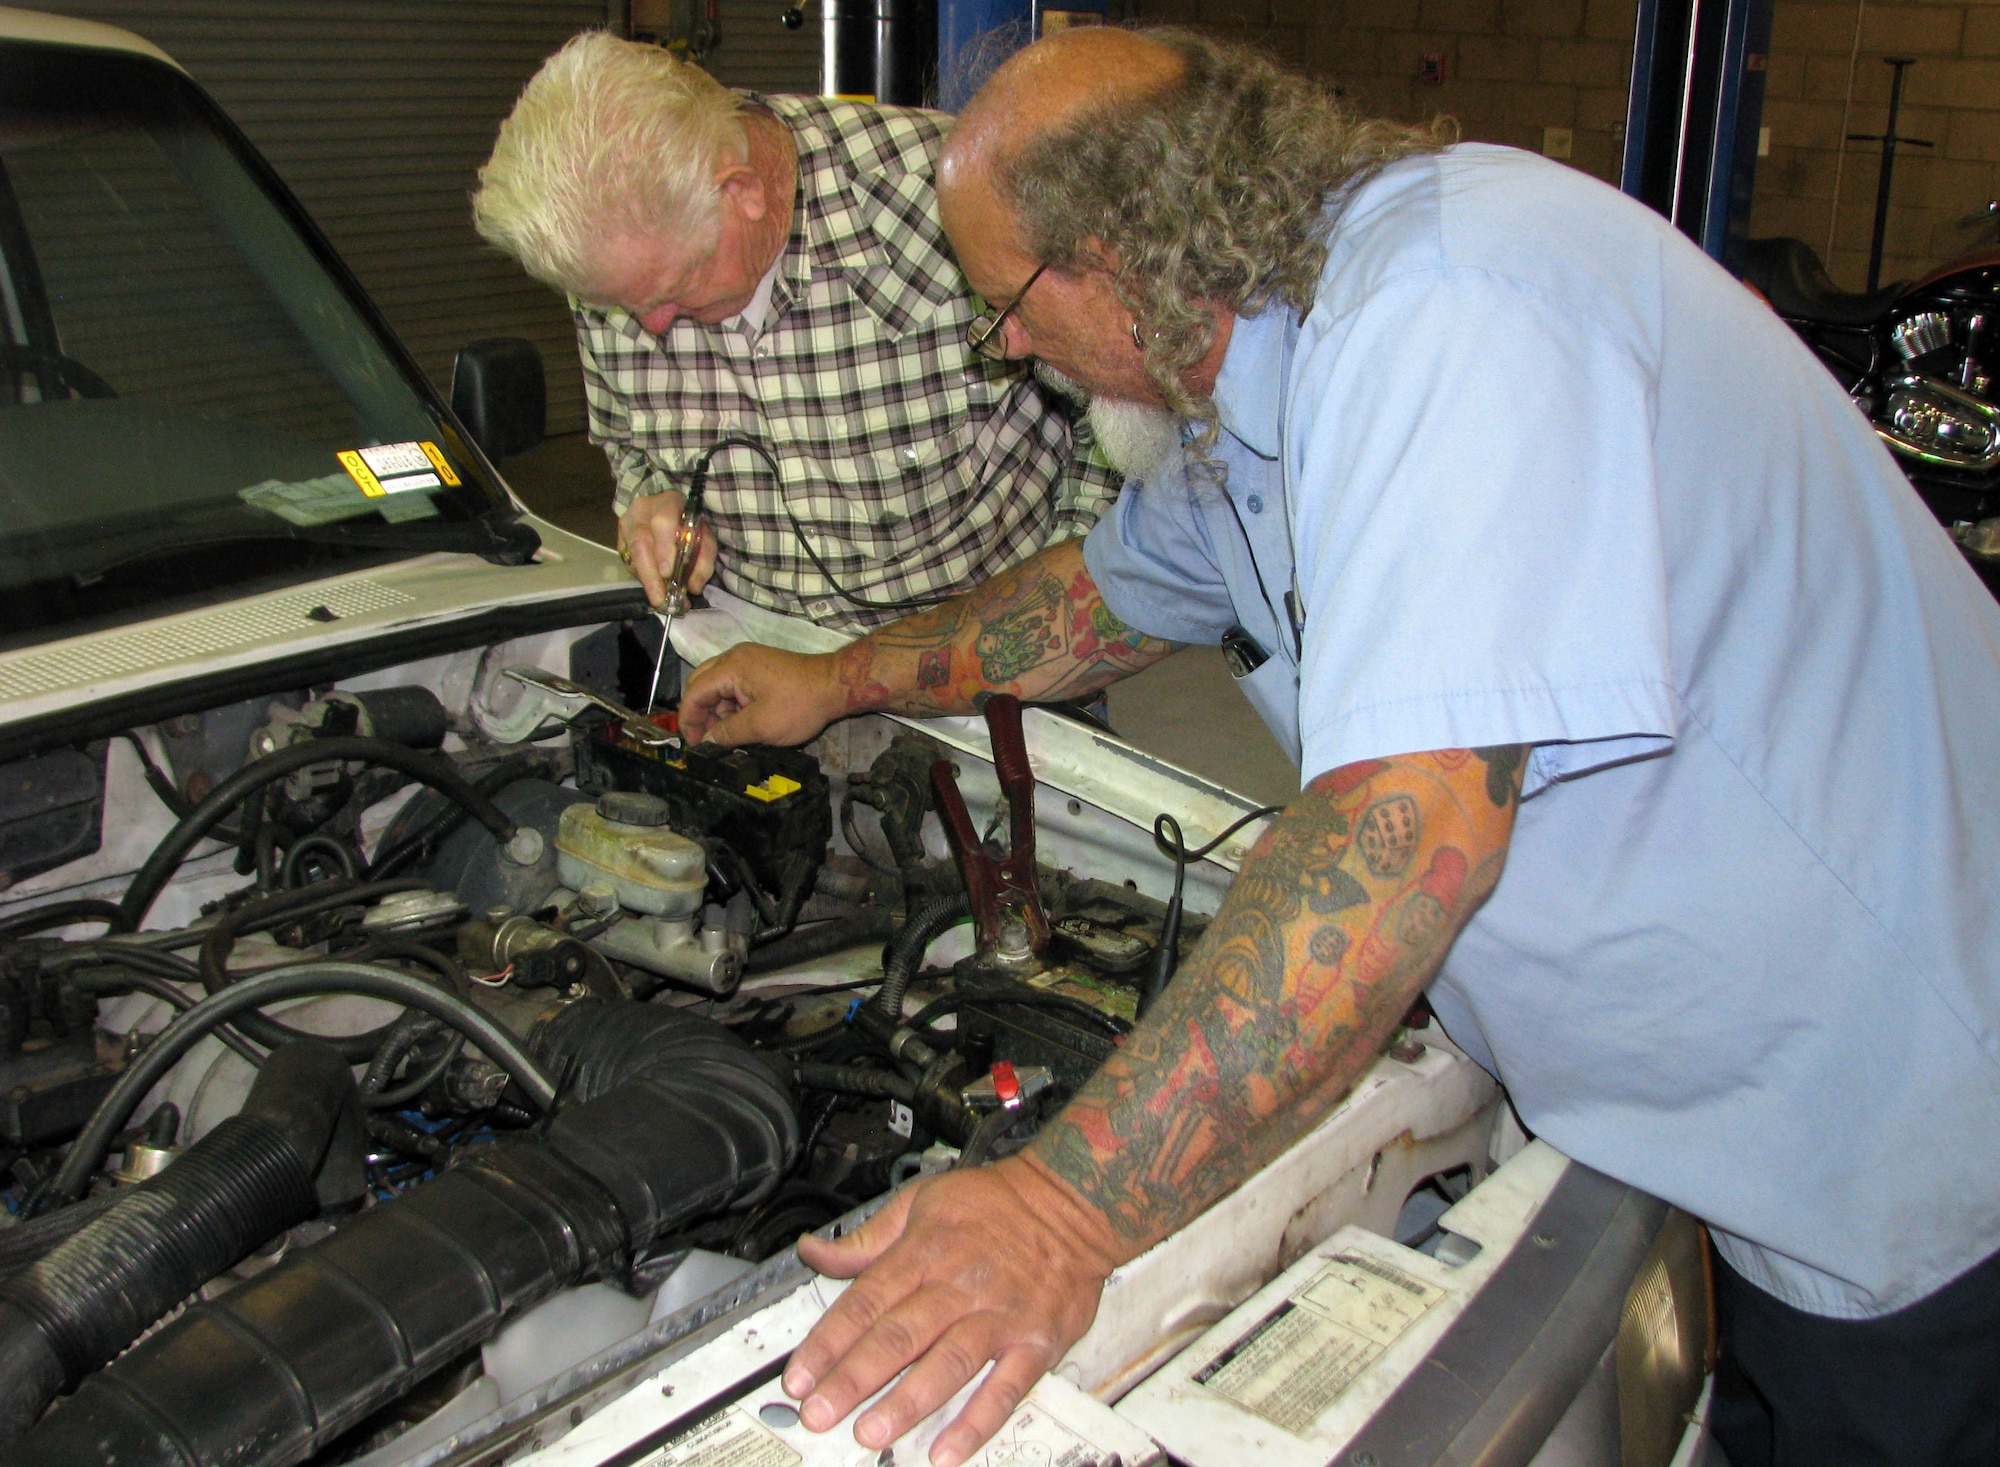 Jessie Mattox, Edwards Auto Hobby Shop supervisior, helps customer Dusty Rhodes, a retired NASA employee, troubleshoot a minor problem with the engine in Rhodes' 1995 Ford Ranger. (U.S. Air Force Photo by Diane Betzler) 